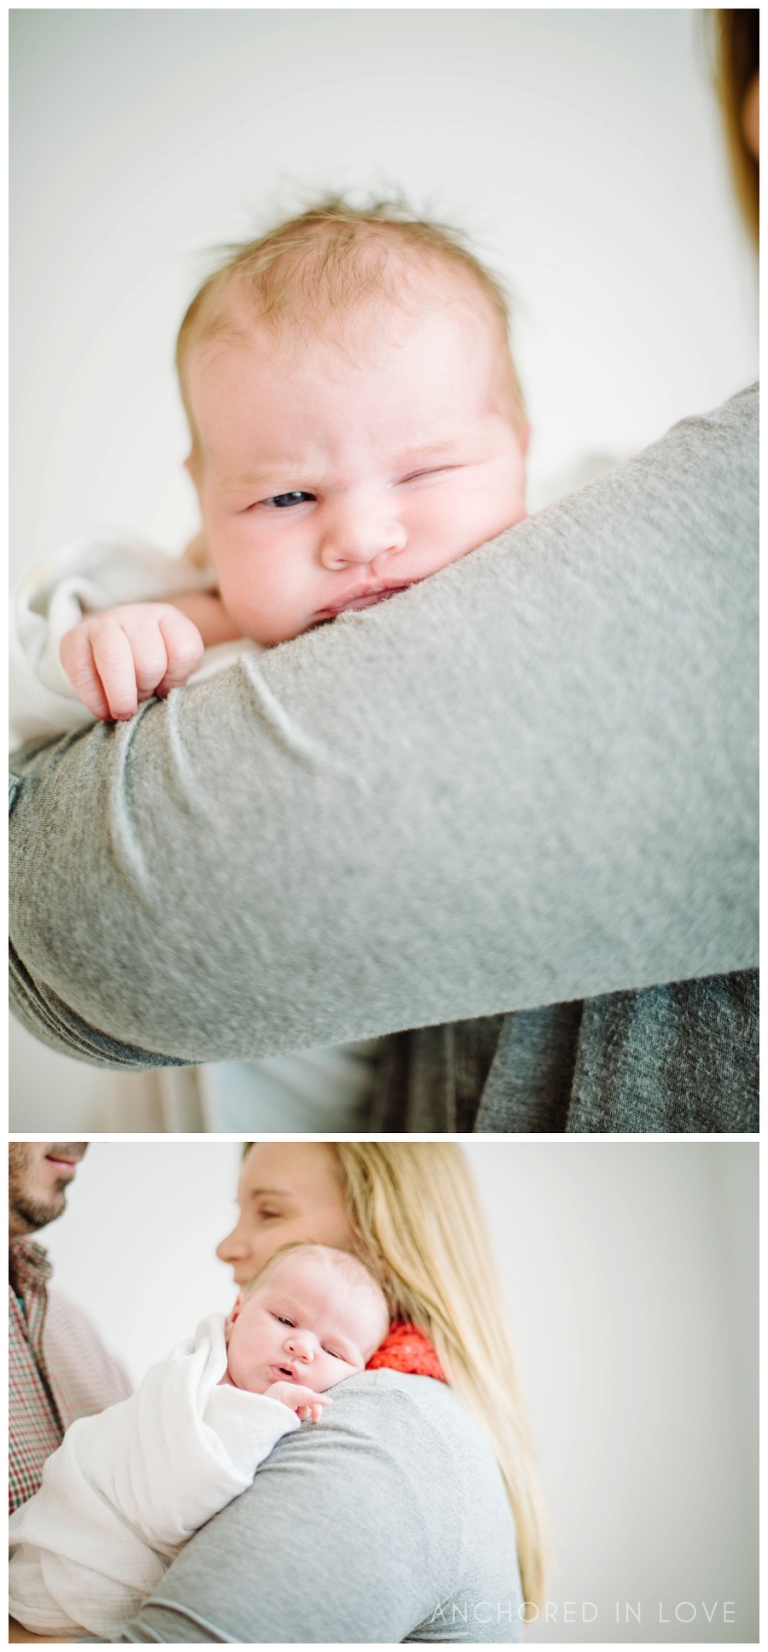 Emily Newborn Session Wilmington NC Anchored in Love_0008.jpg